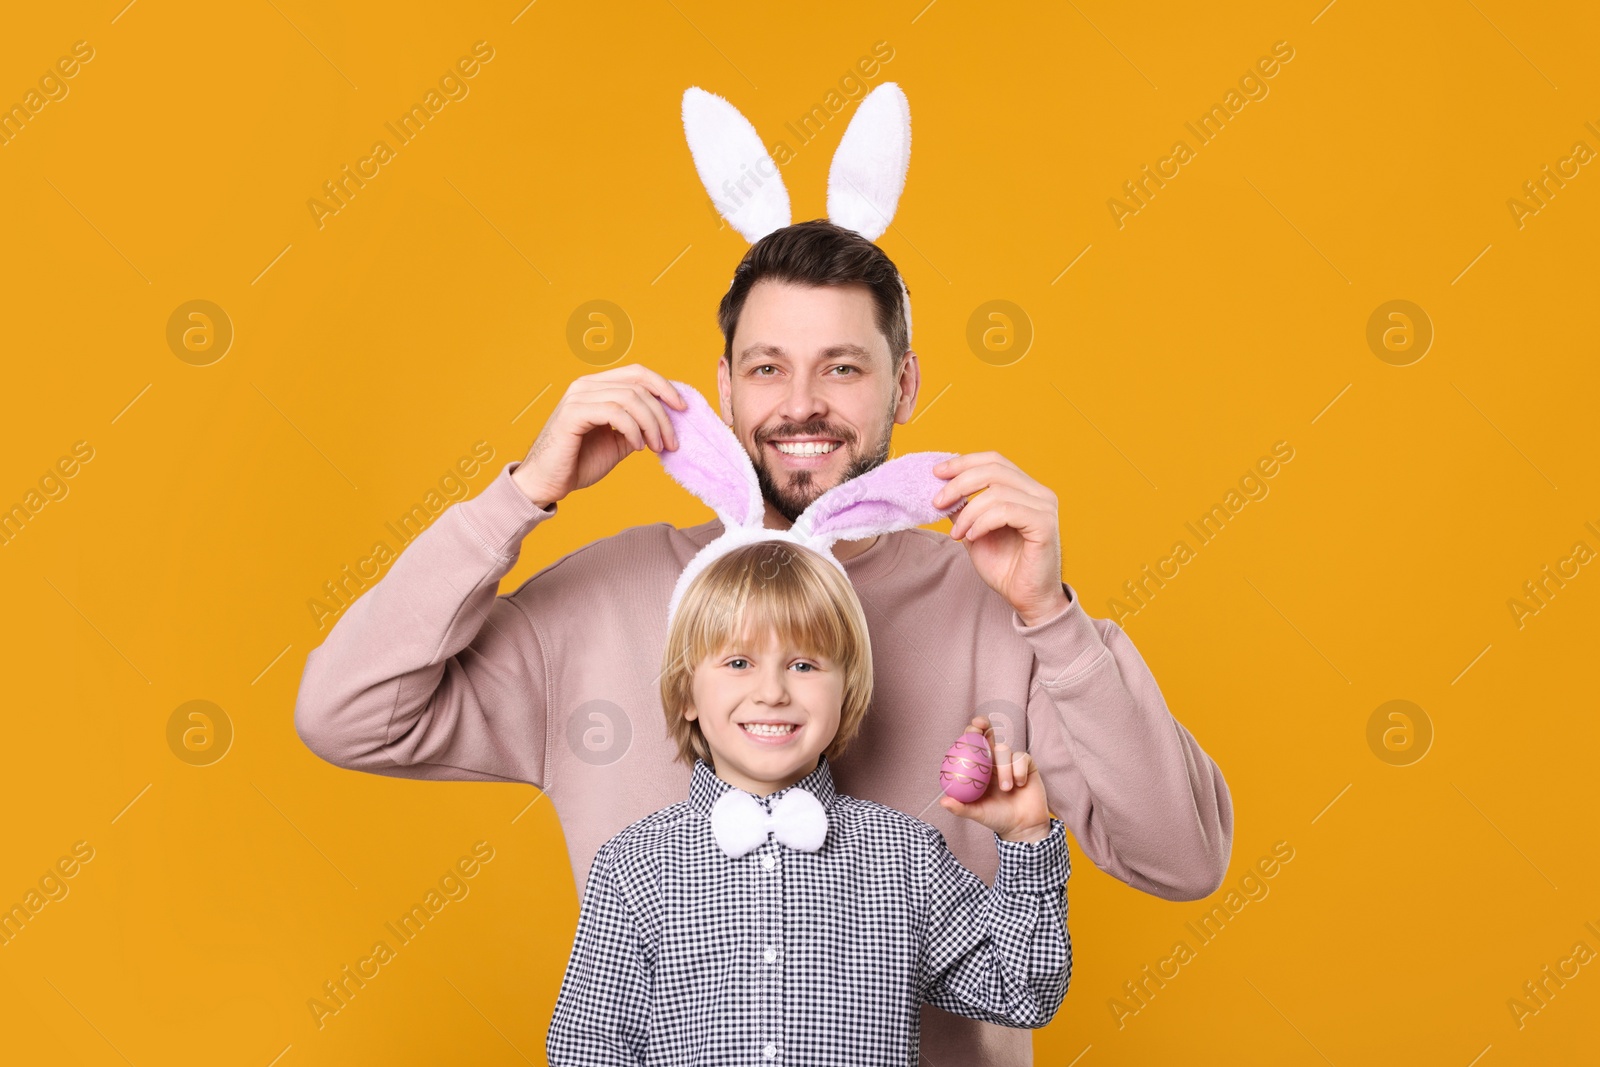 Photo of Father and son in bunny ears headbands having fun on orange background. Easter celebration